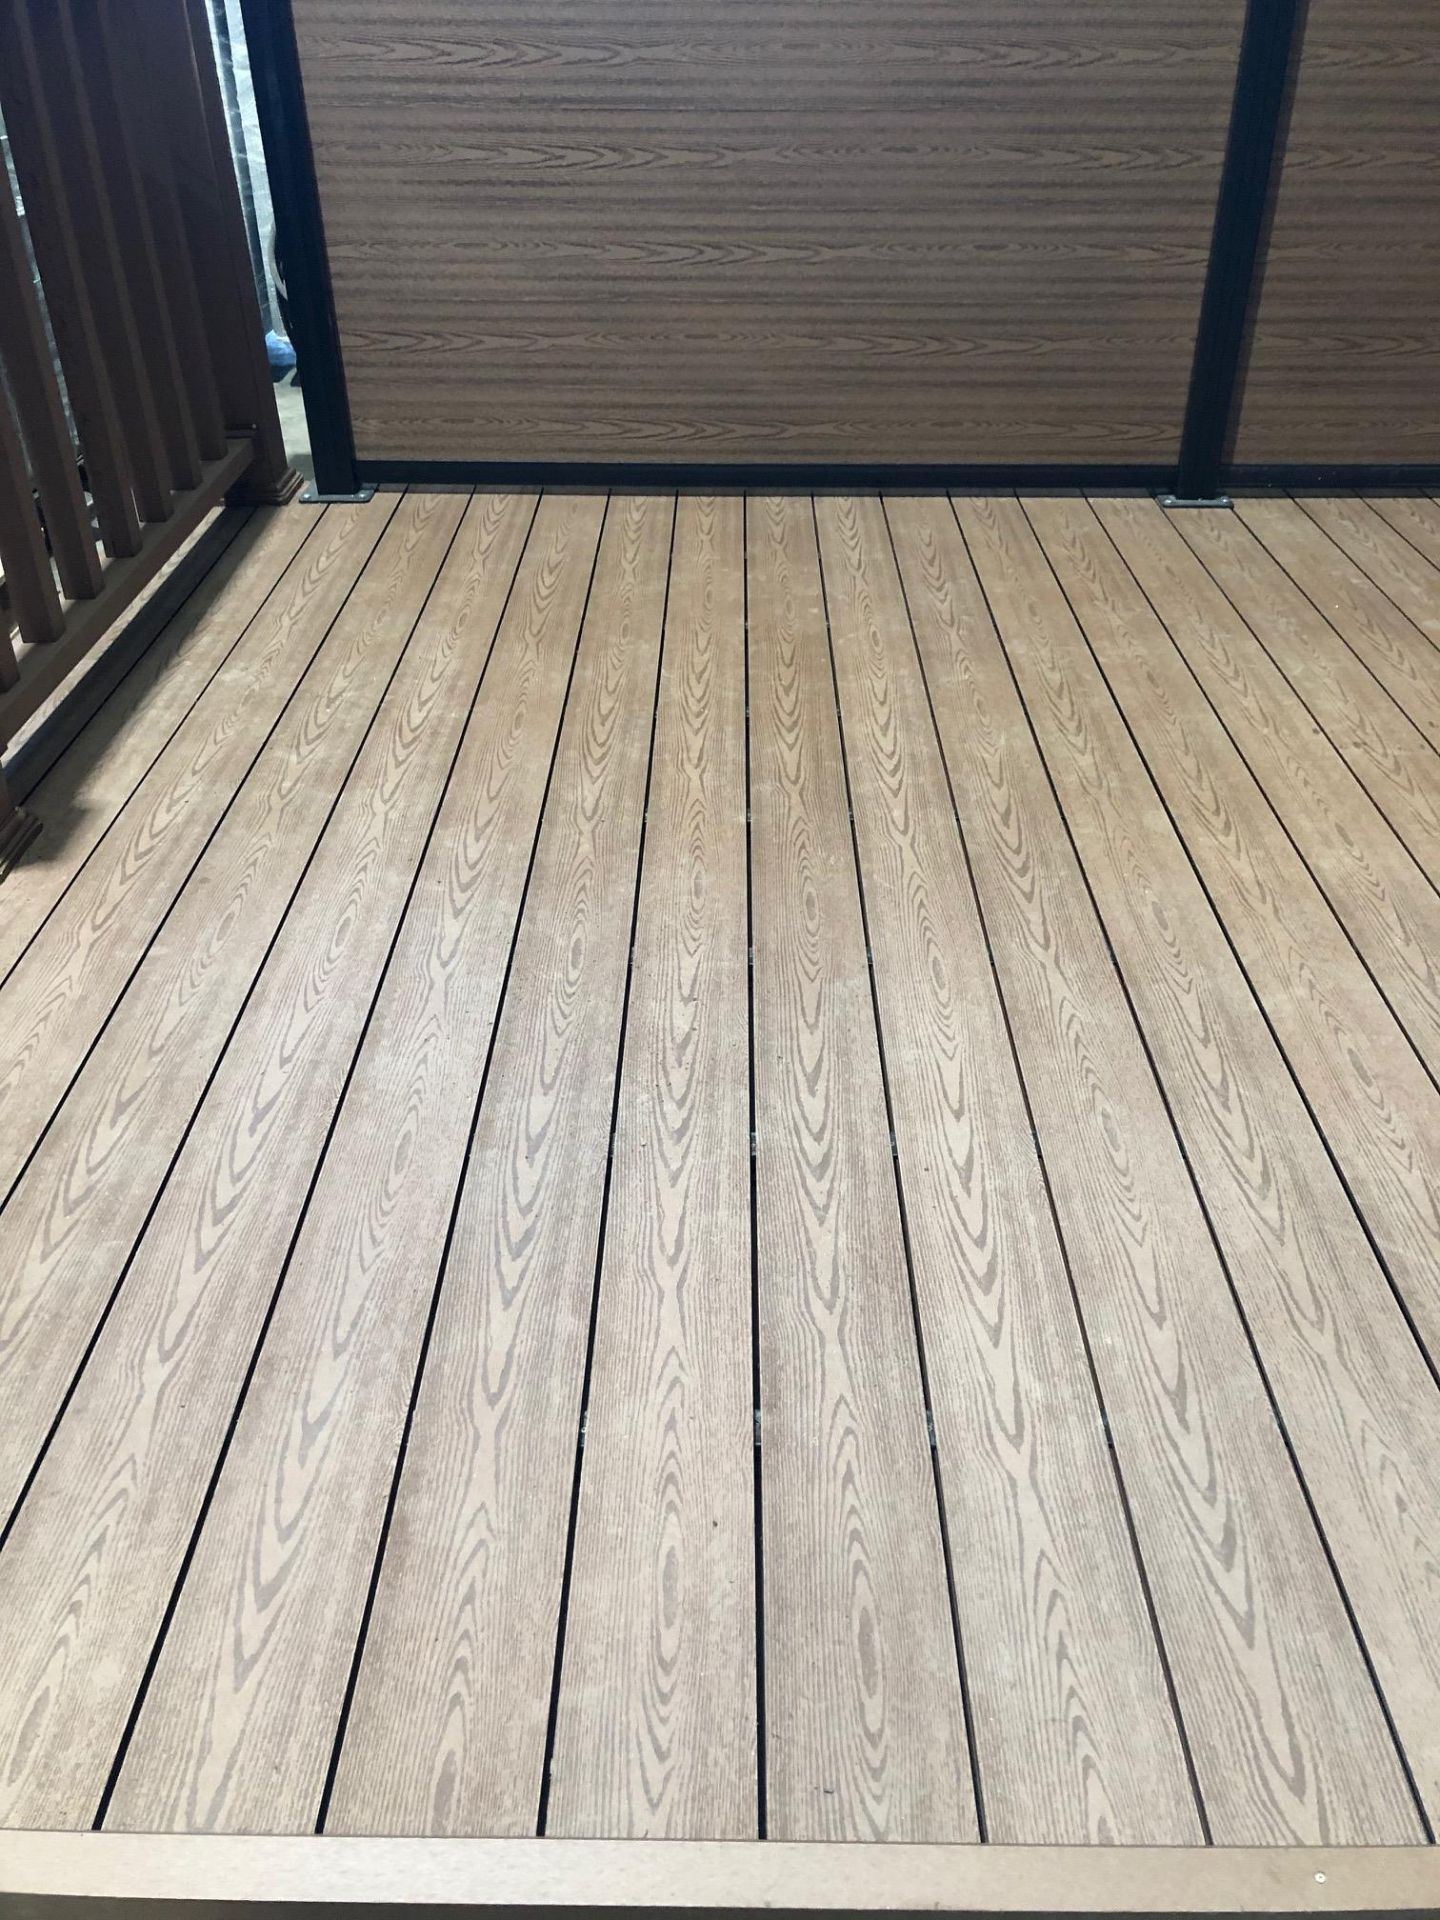 * Complete Light Grey WPC decking Kit 2.9m x 2.9m includes joists - clips - decking - screws & fixin - Image 3 of 7